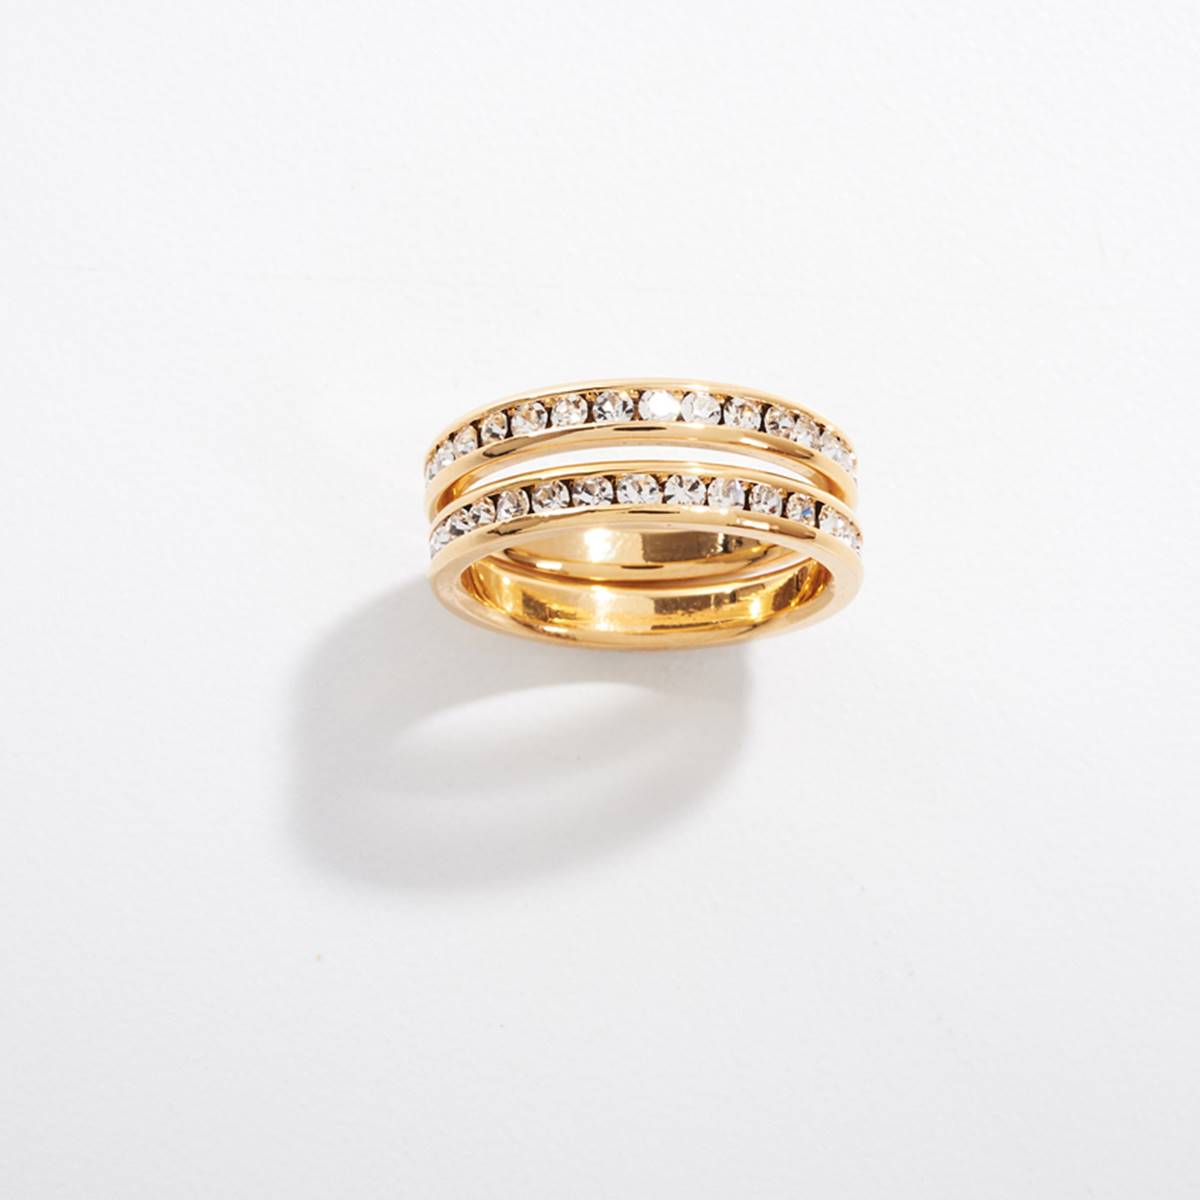 Ashley Cooper(tm) Crystal Pave Duo Gold Eternity Band Ring